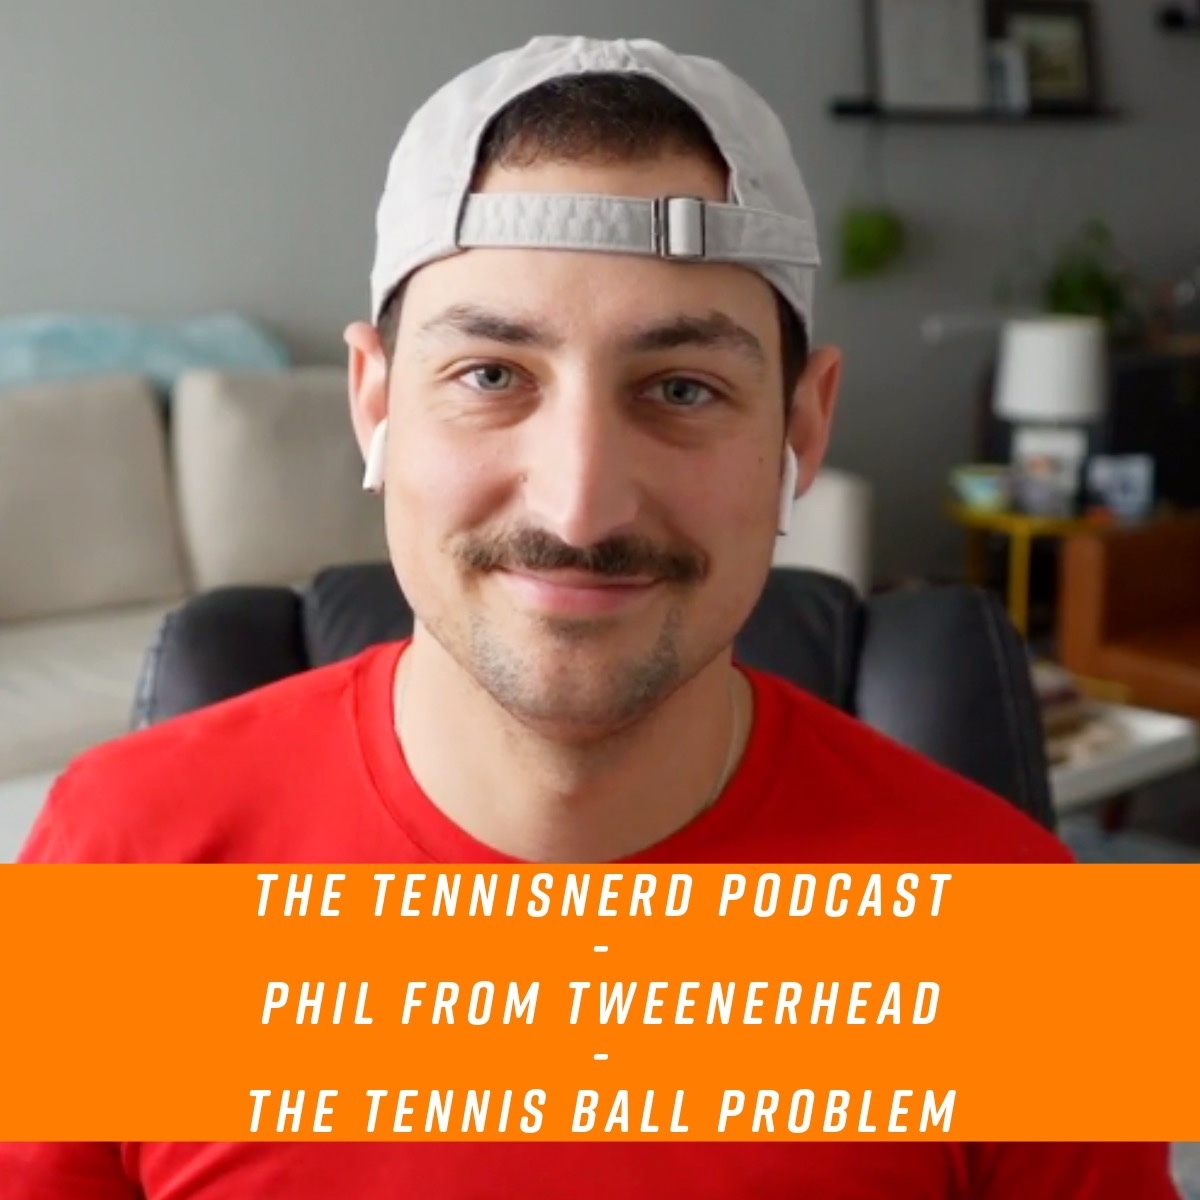 The Tennis Ball Problem with Phil from Tweenerhead